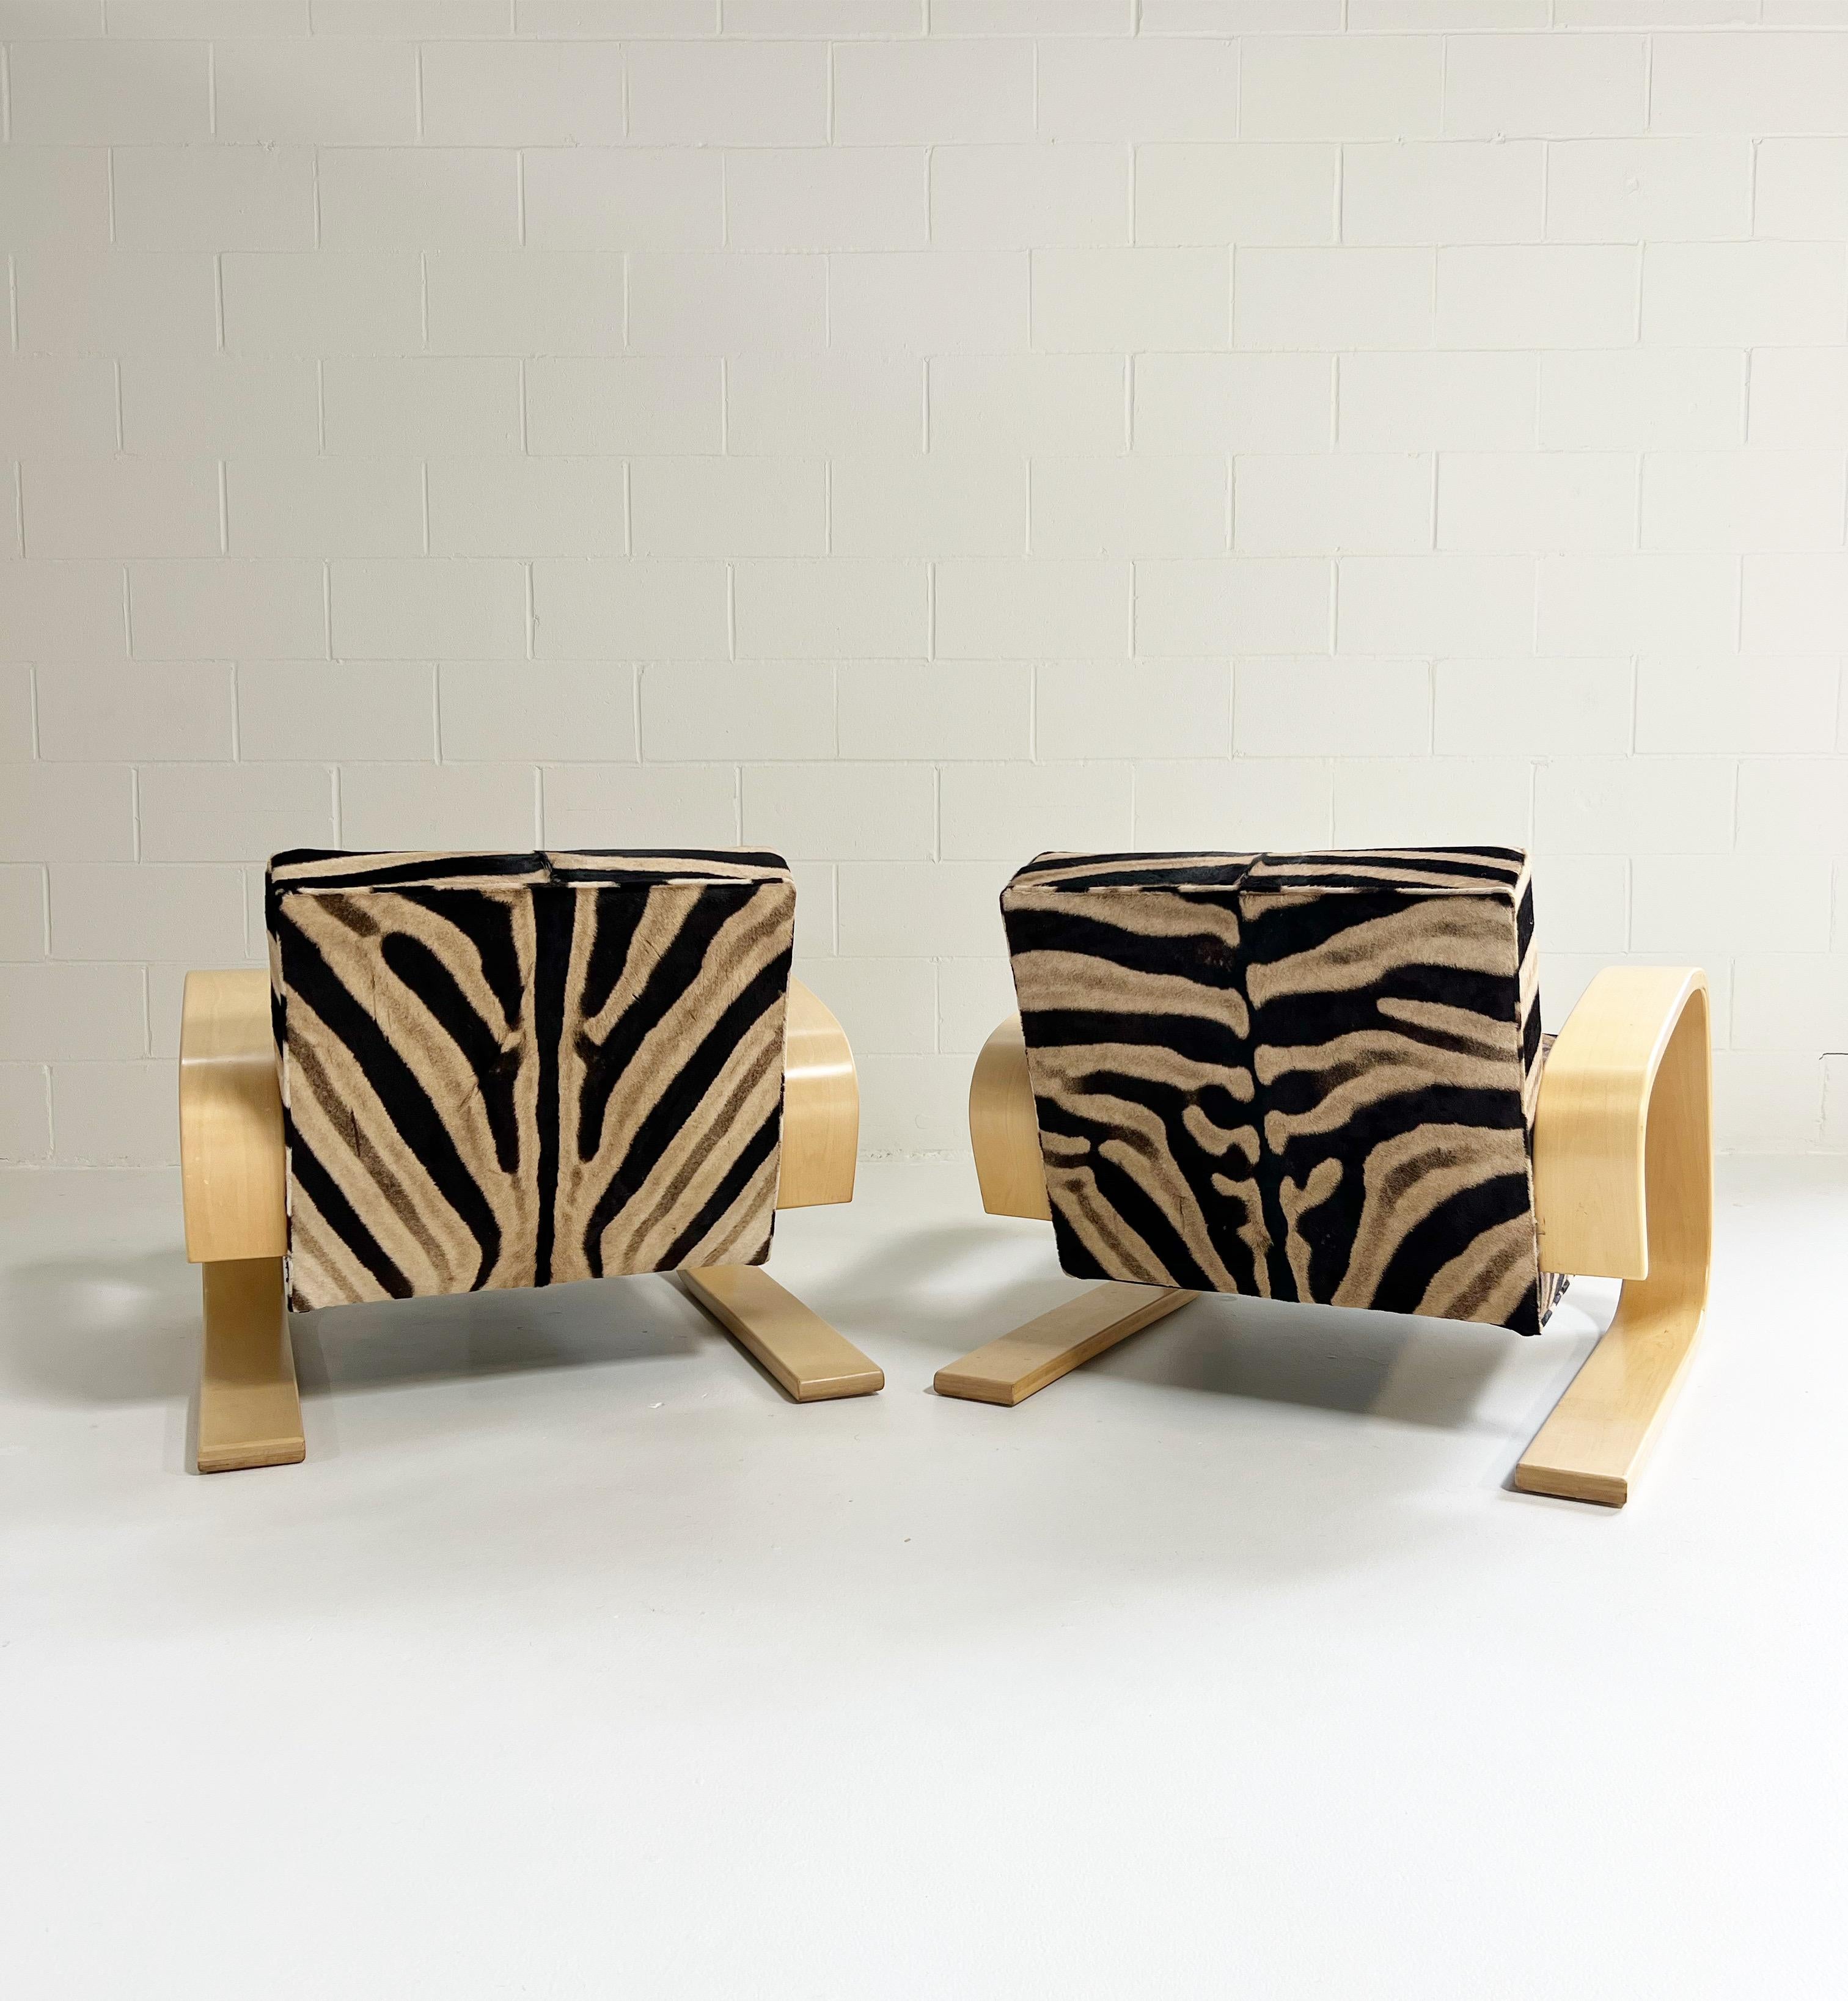 One-of-a-Kind Pair of Alvar Aalto Model 400 